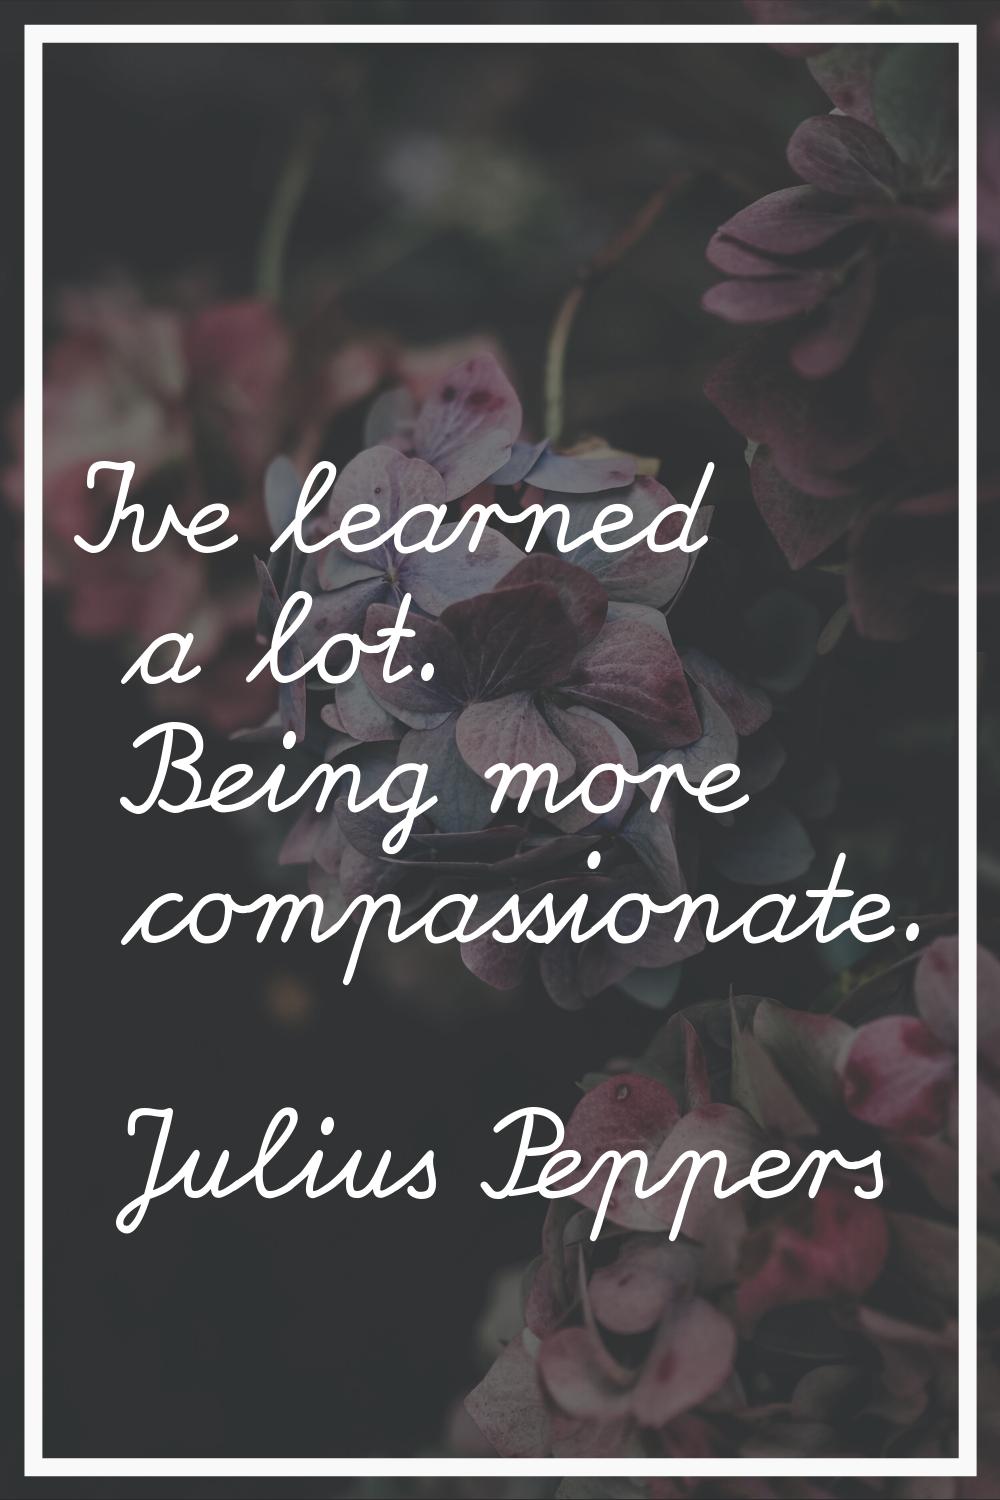 I've learned a lot. Being more compassionate.